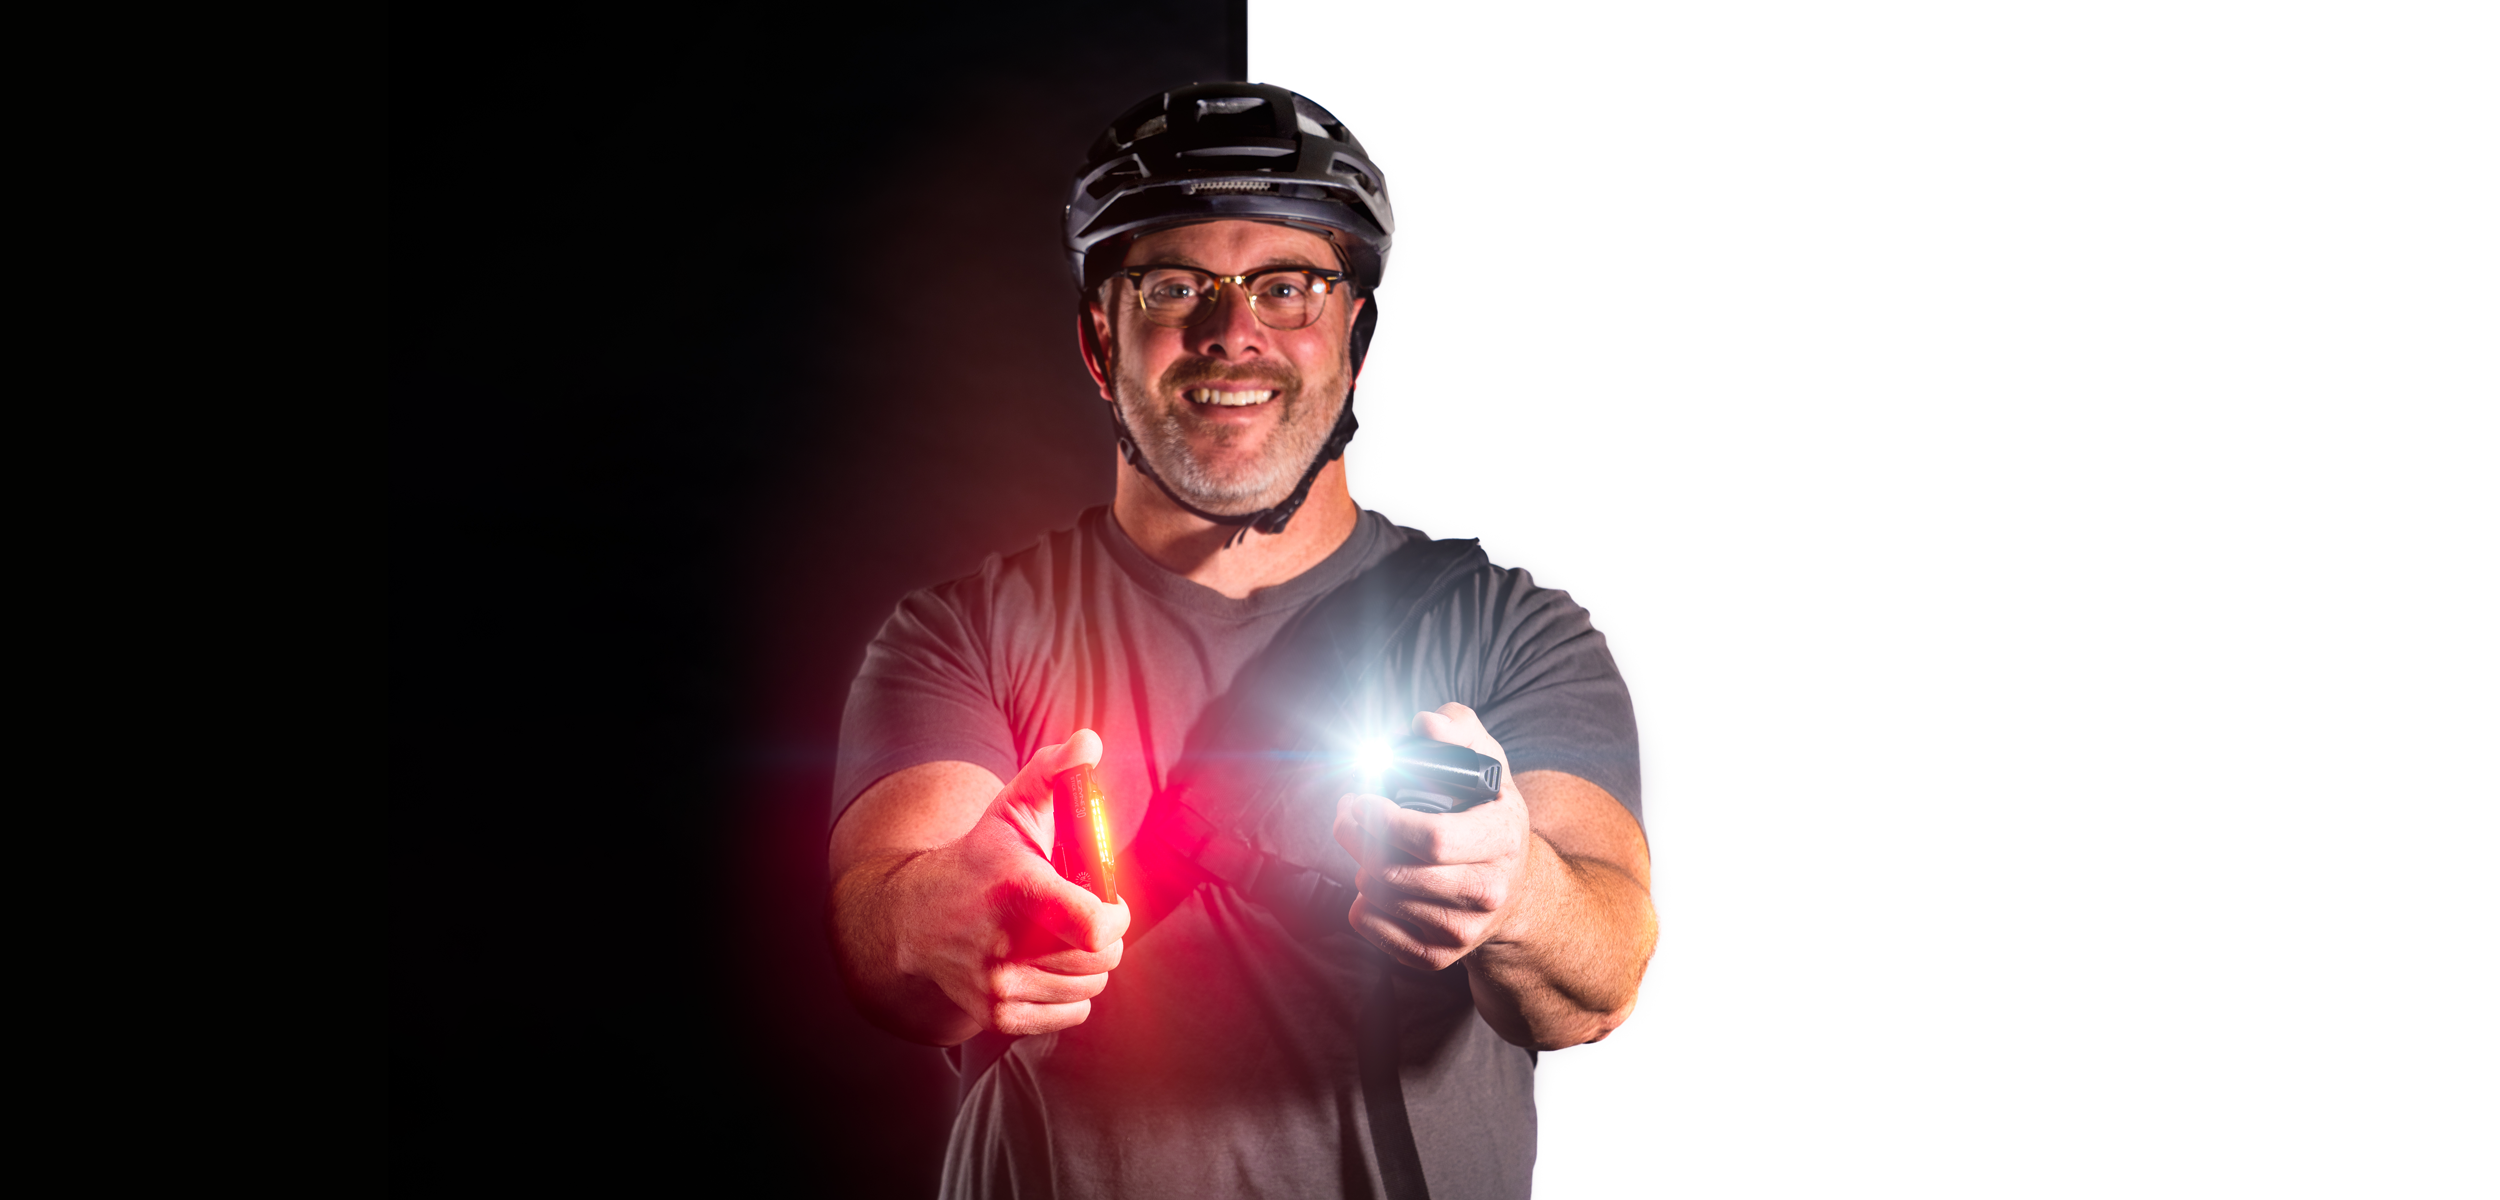 Commuter cyclist holding a front and rear light